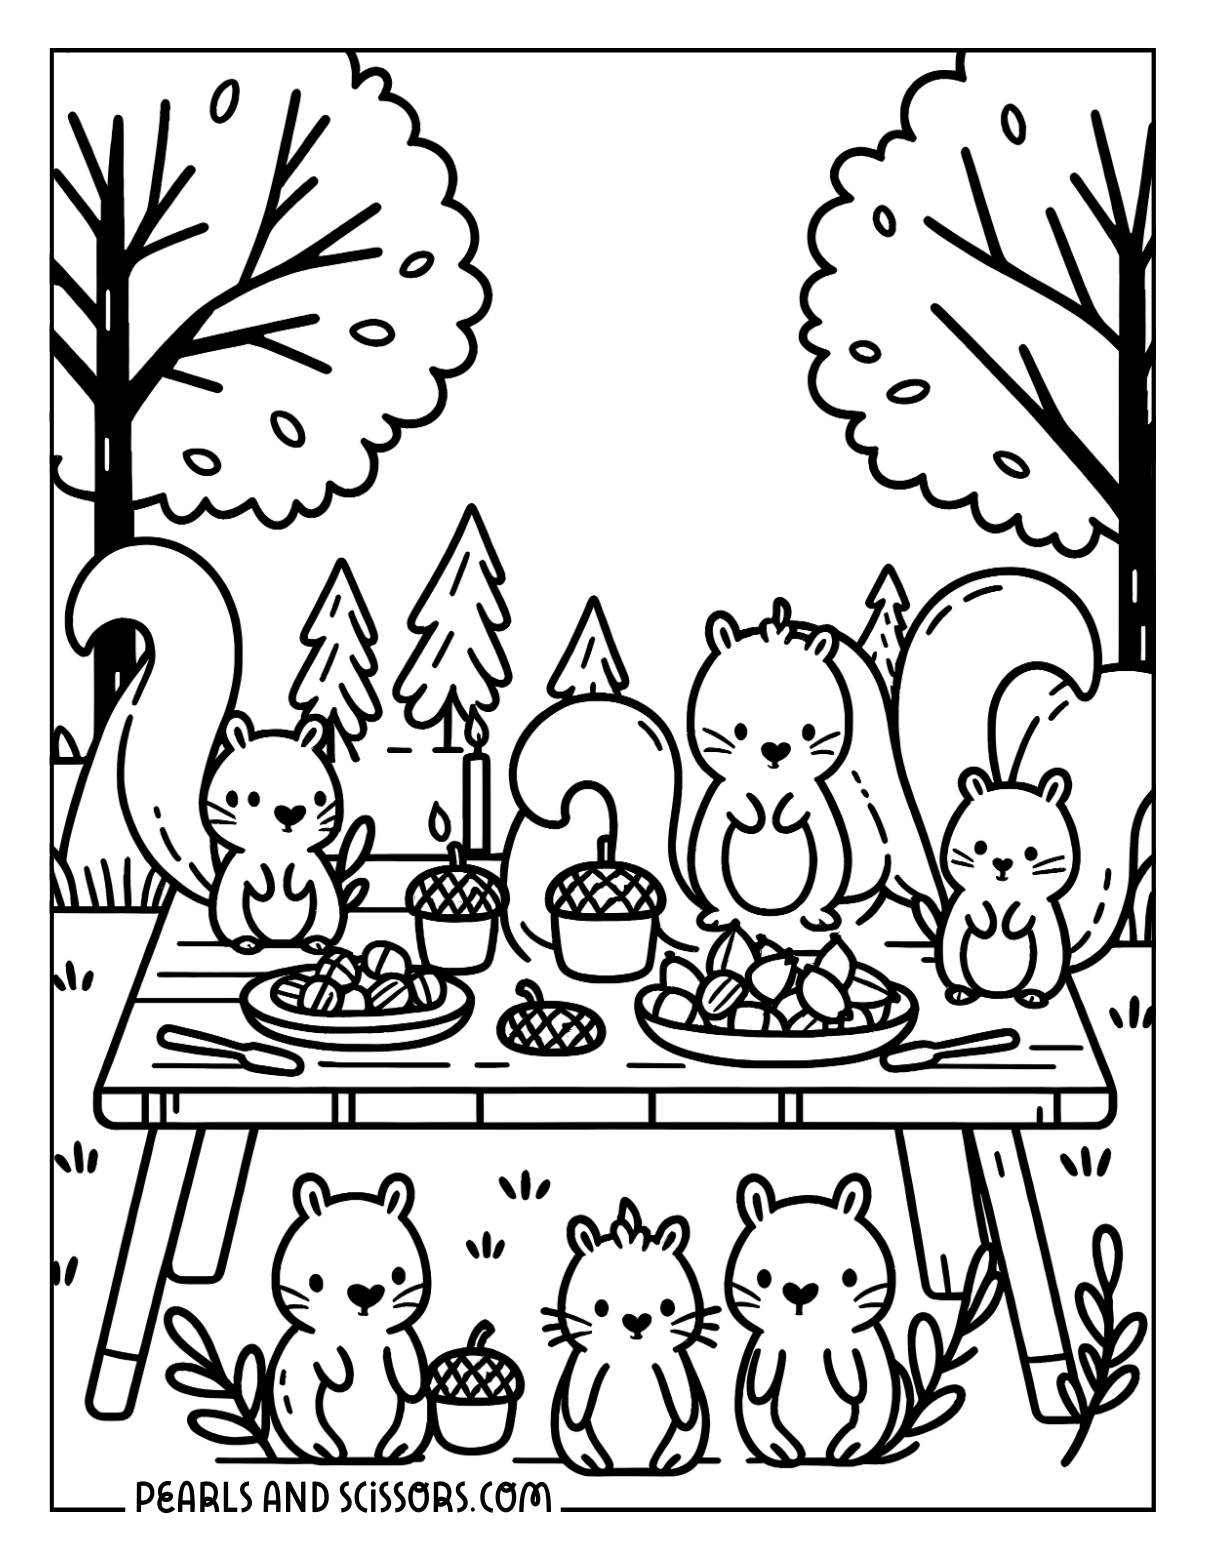 Family members of squirrels eating acorns during fall coloring page.